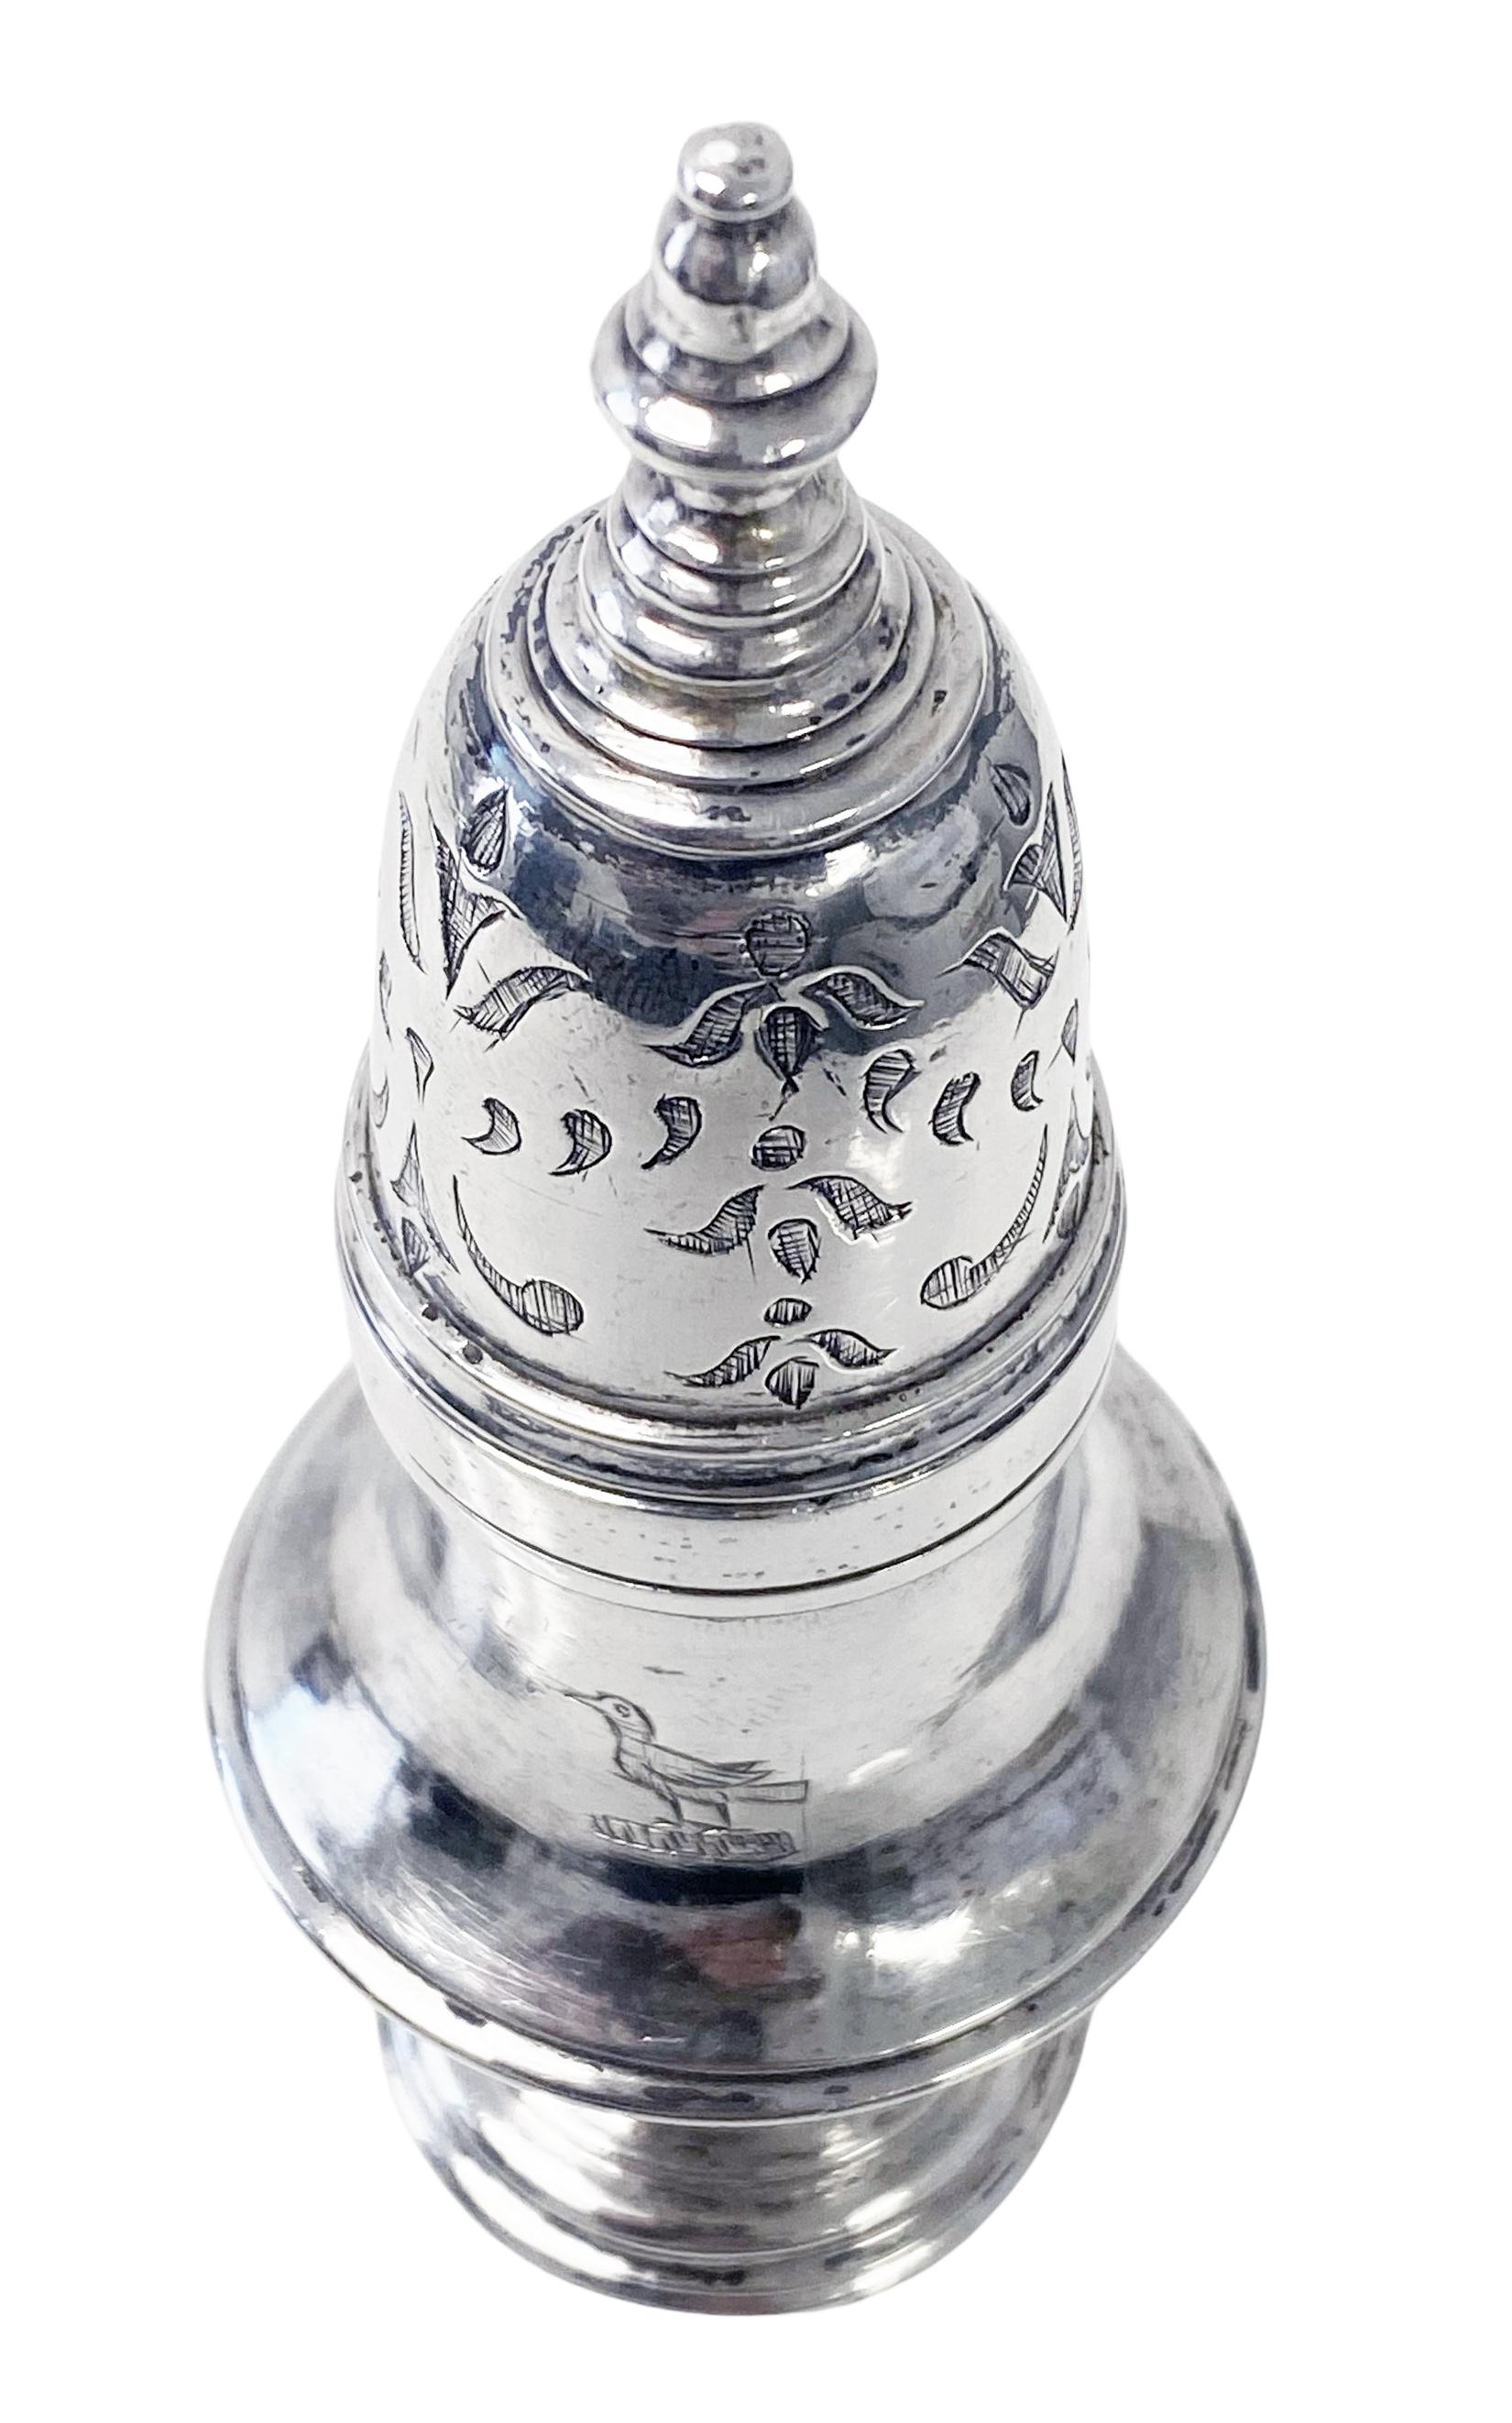 Canadian 18th century Silver Caster Pierre Huguet dit Latour C.1770 with silversmith mark for Michel Fortin Quebec. This blind caster (sleeved for dry mustard) of baluster form, the foliate decorated cover with plain knopped finial, the lower body